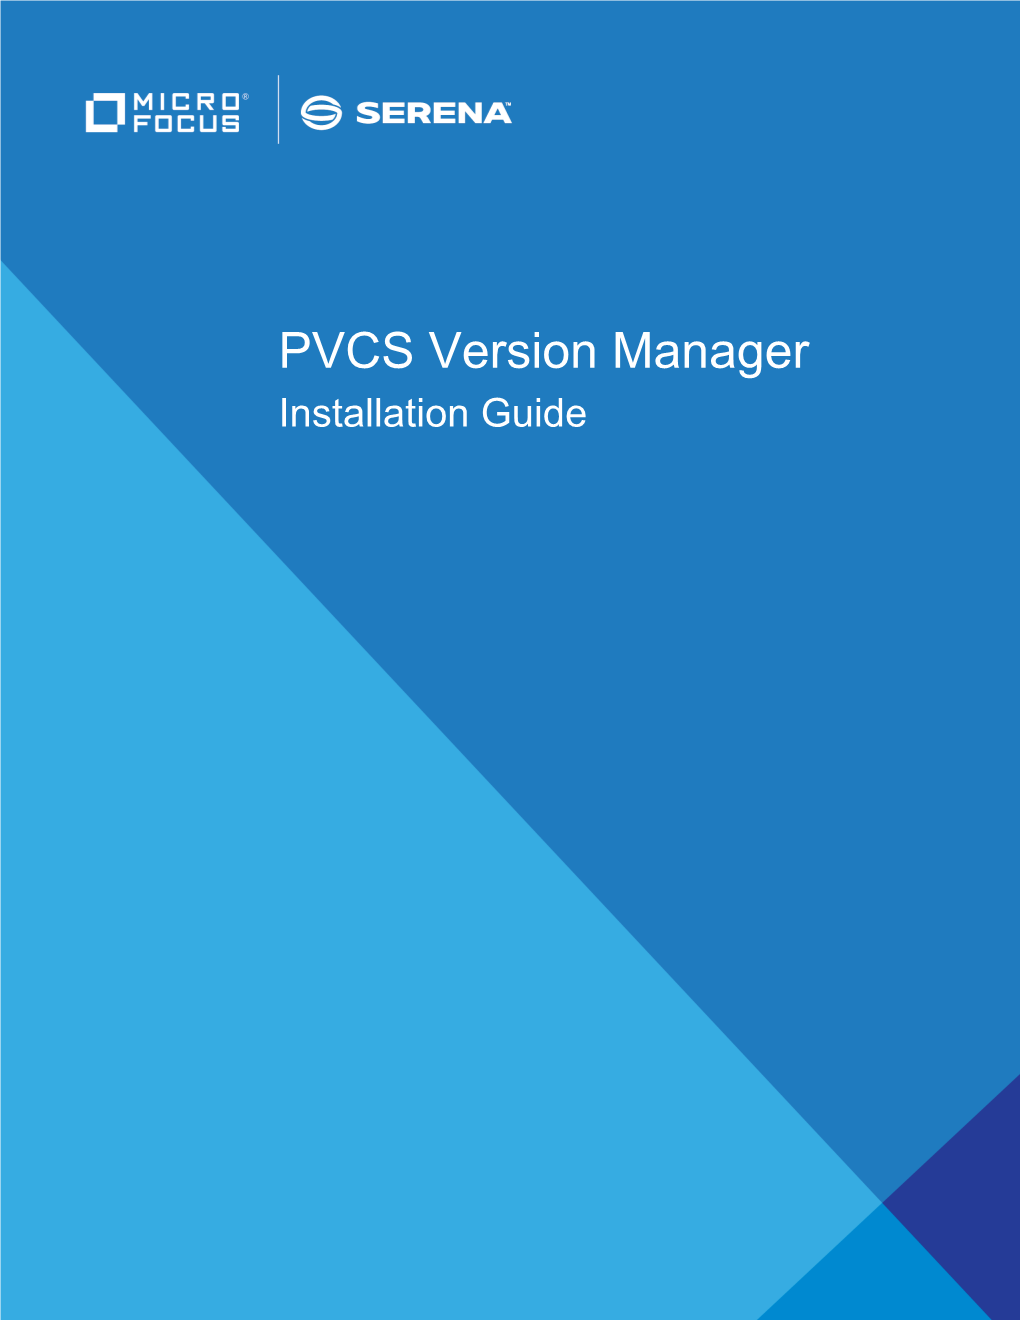 PVCS Version Manager Installation Guide Copyright © 2018 Serena Software, Inc., a Micro Focus Company